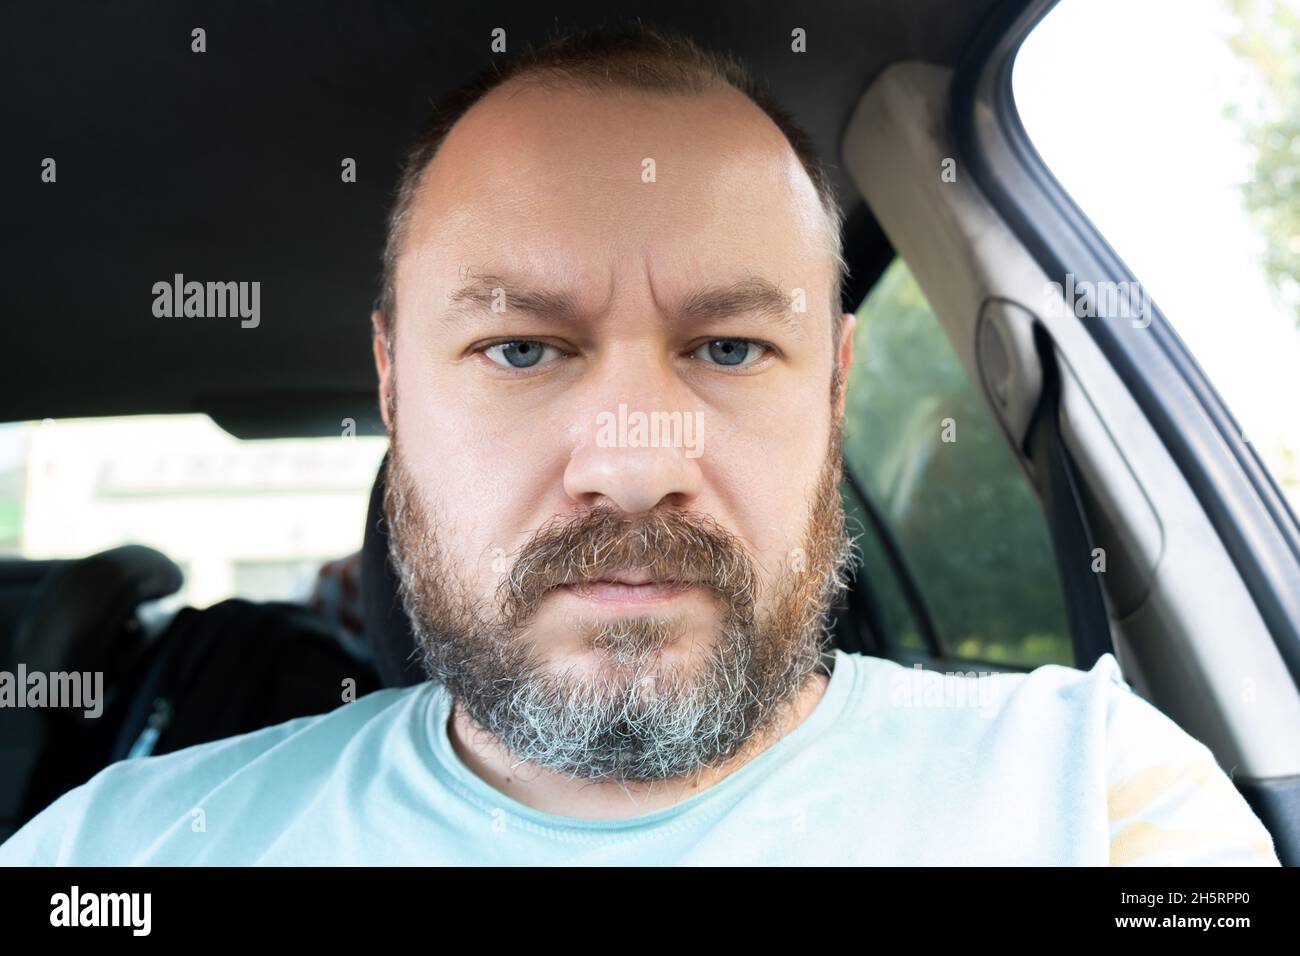 Portrait of an unshaven man 40 years old in a car. An ordinary man frowns at the camera. Stock Photo